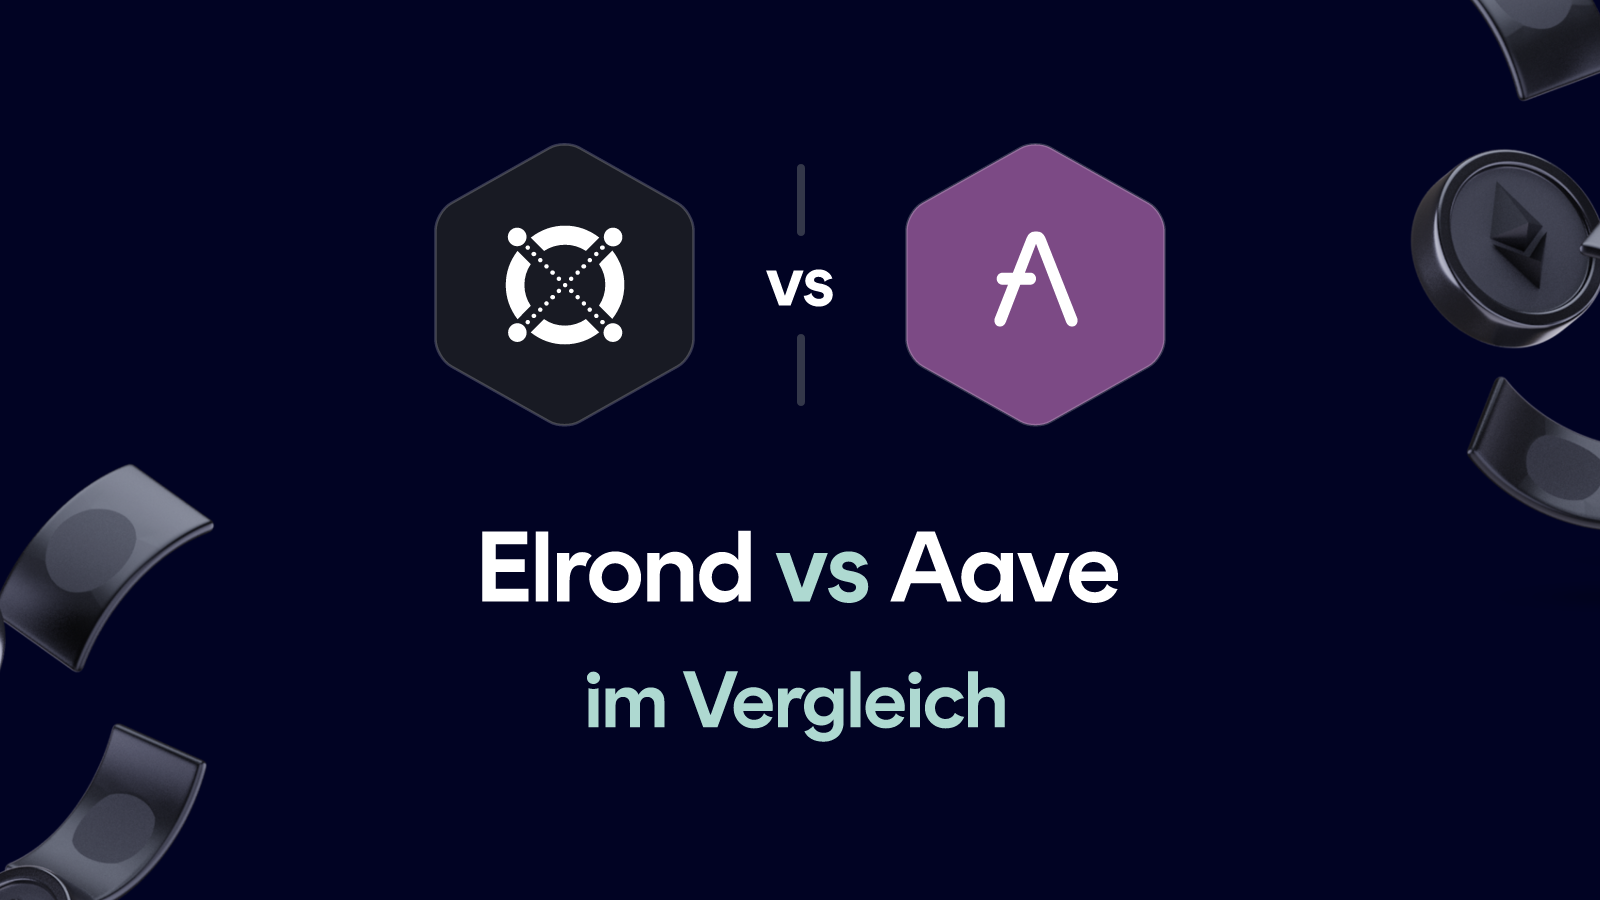 Elrond vs Aave